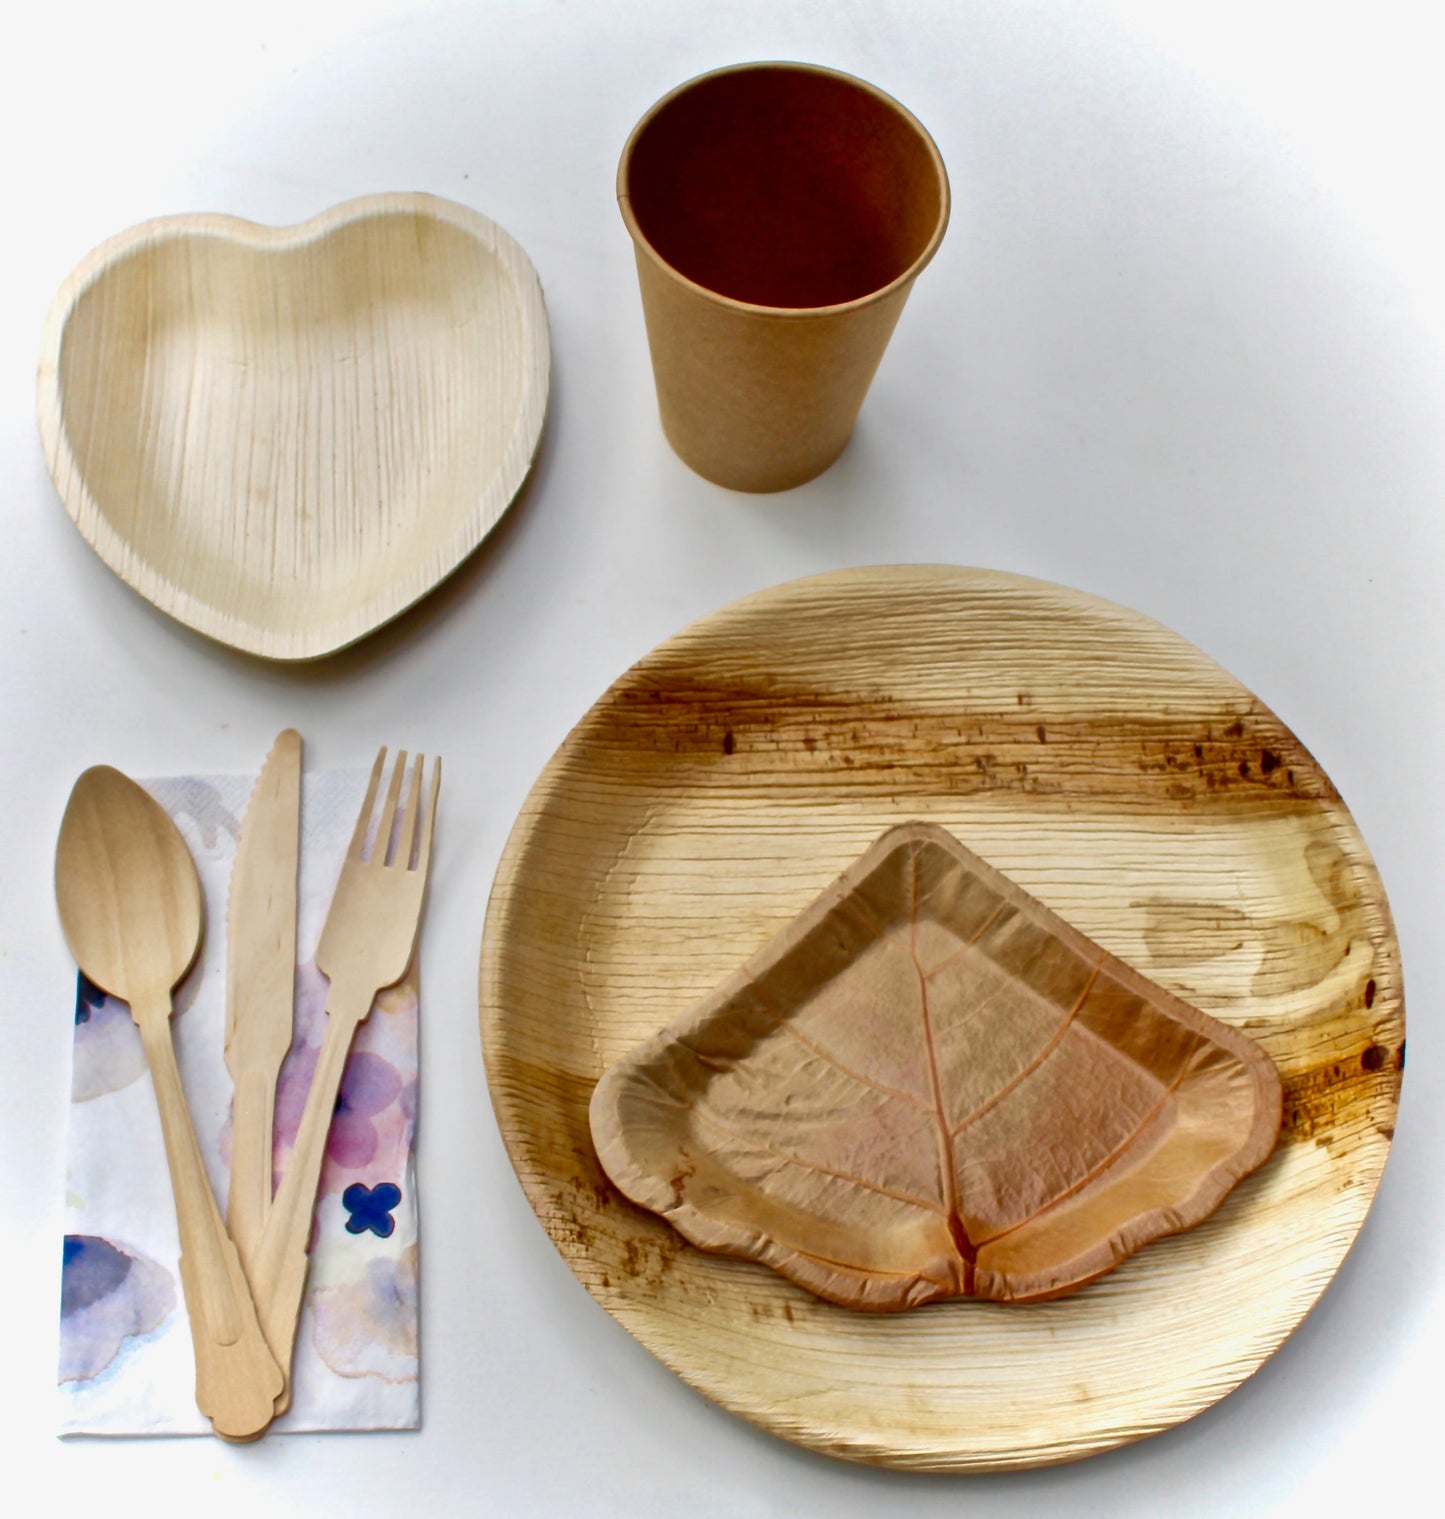 bamboo Type palm Leaf Plate 20 Pic Deep Square 10" - 20 Pic Sea Grape Dessert Plate 7" - 60 Pic Utensils Wood Birch and 40 pic Napkin